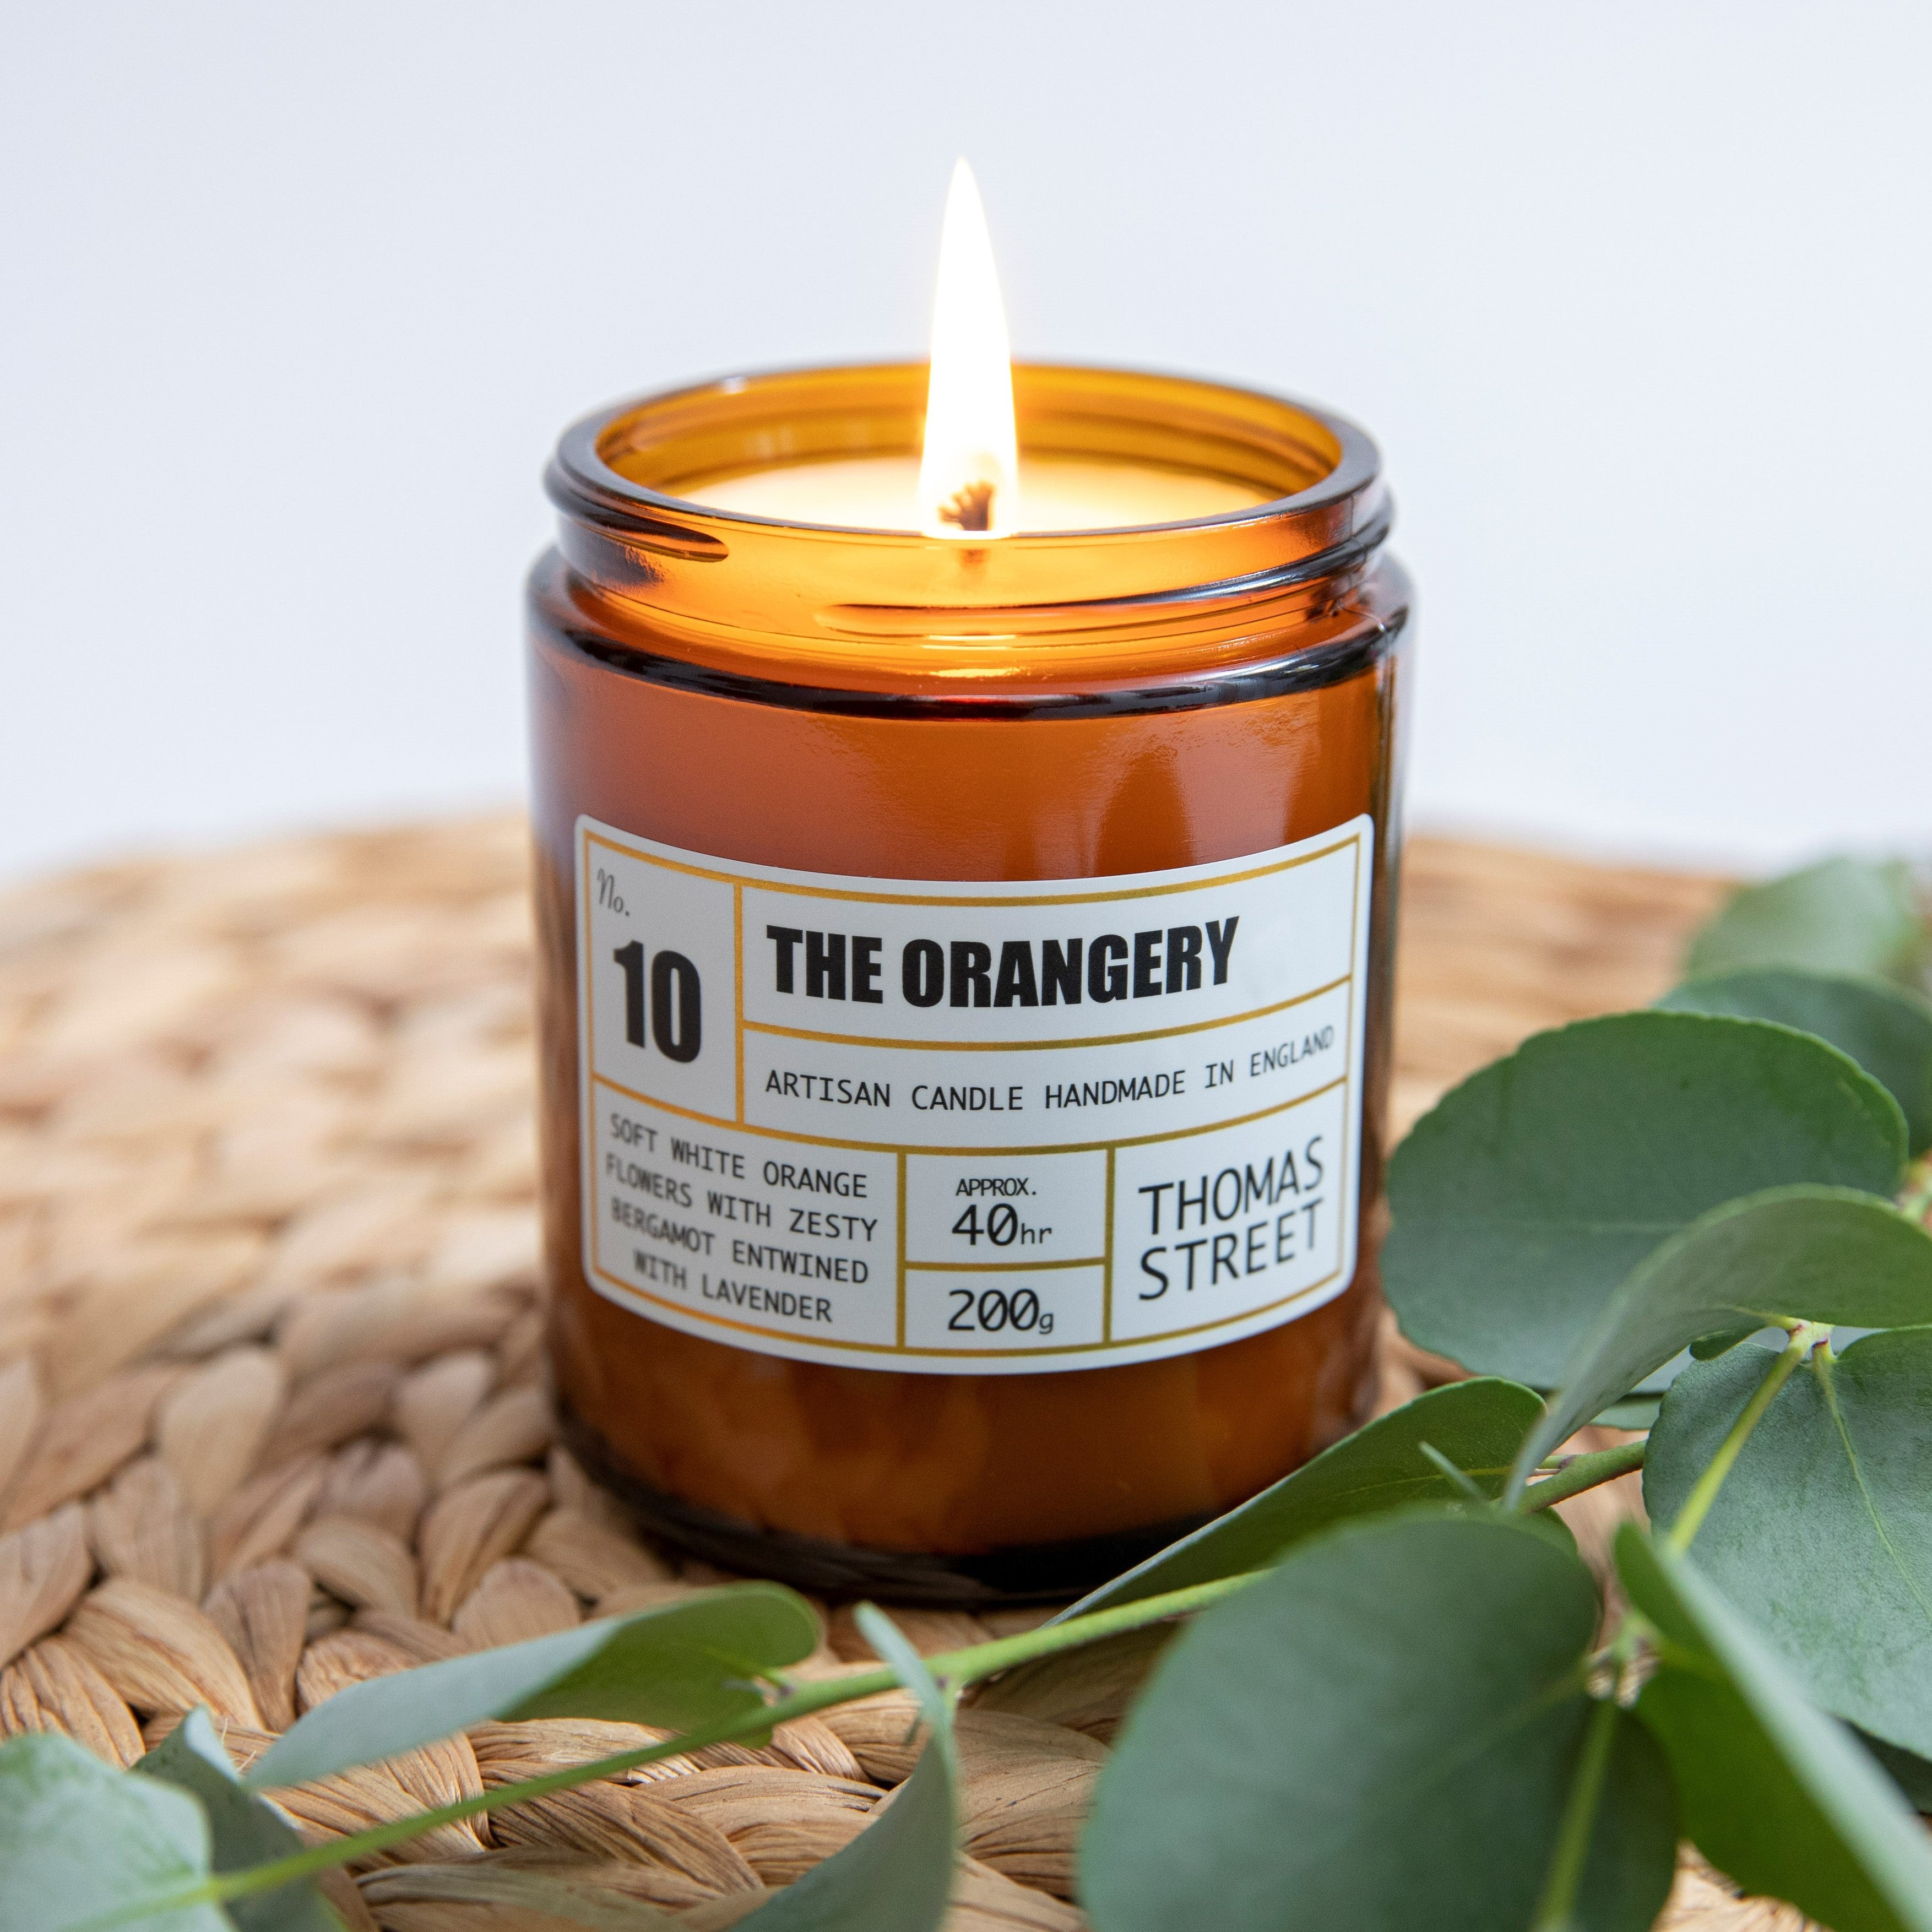 Thomas Street The Orangery Soy Wax Scented Candle